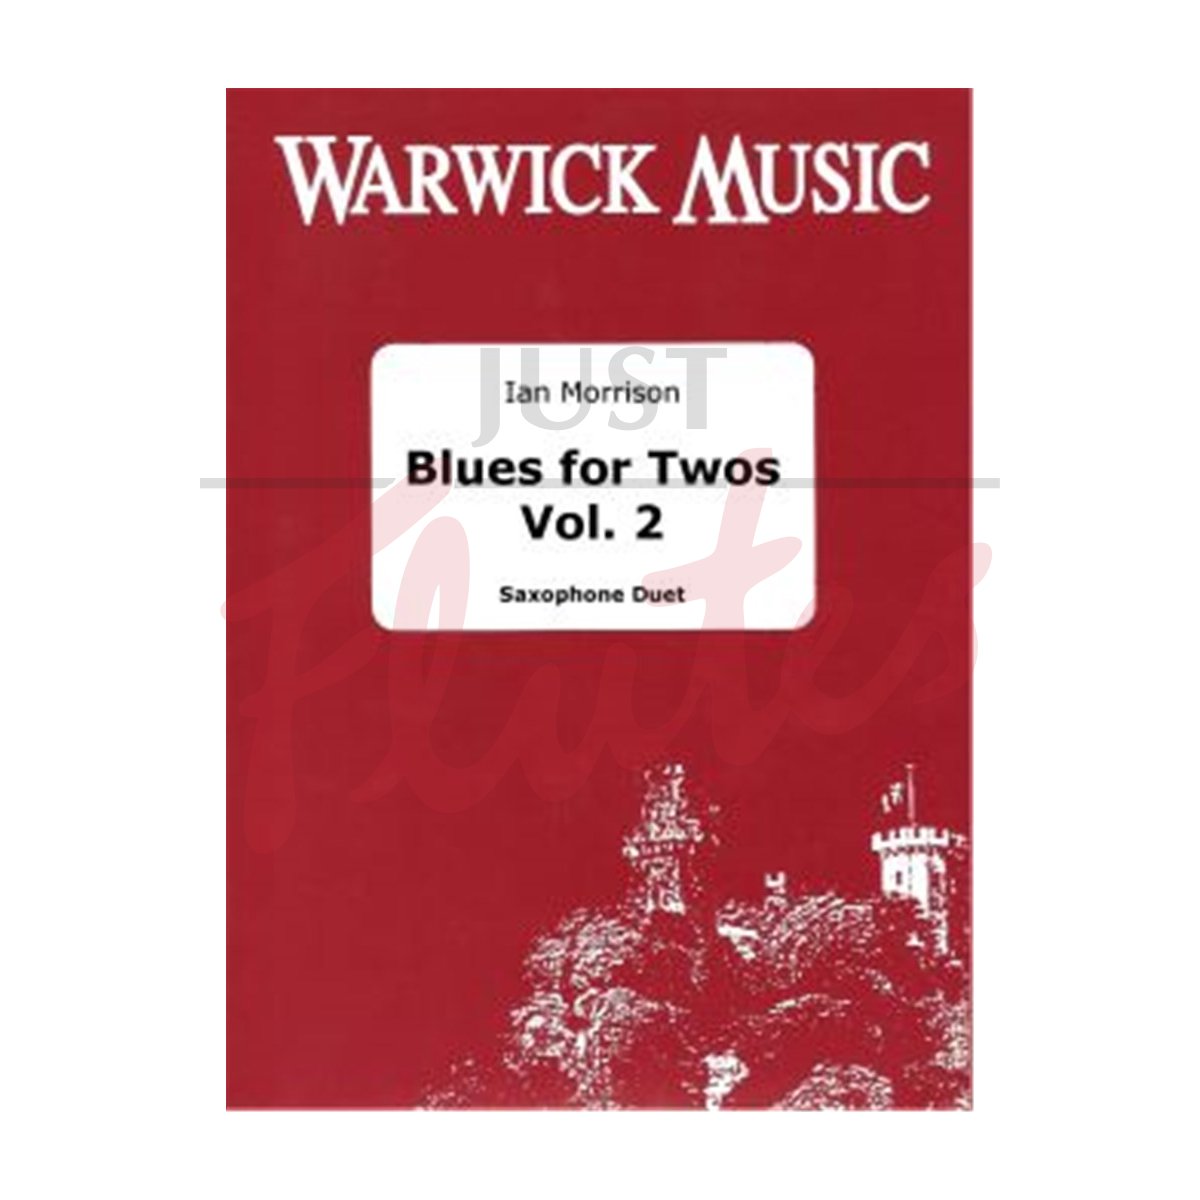 Blues for Twos, Volume 2 for Saxophone Duet